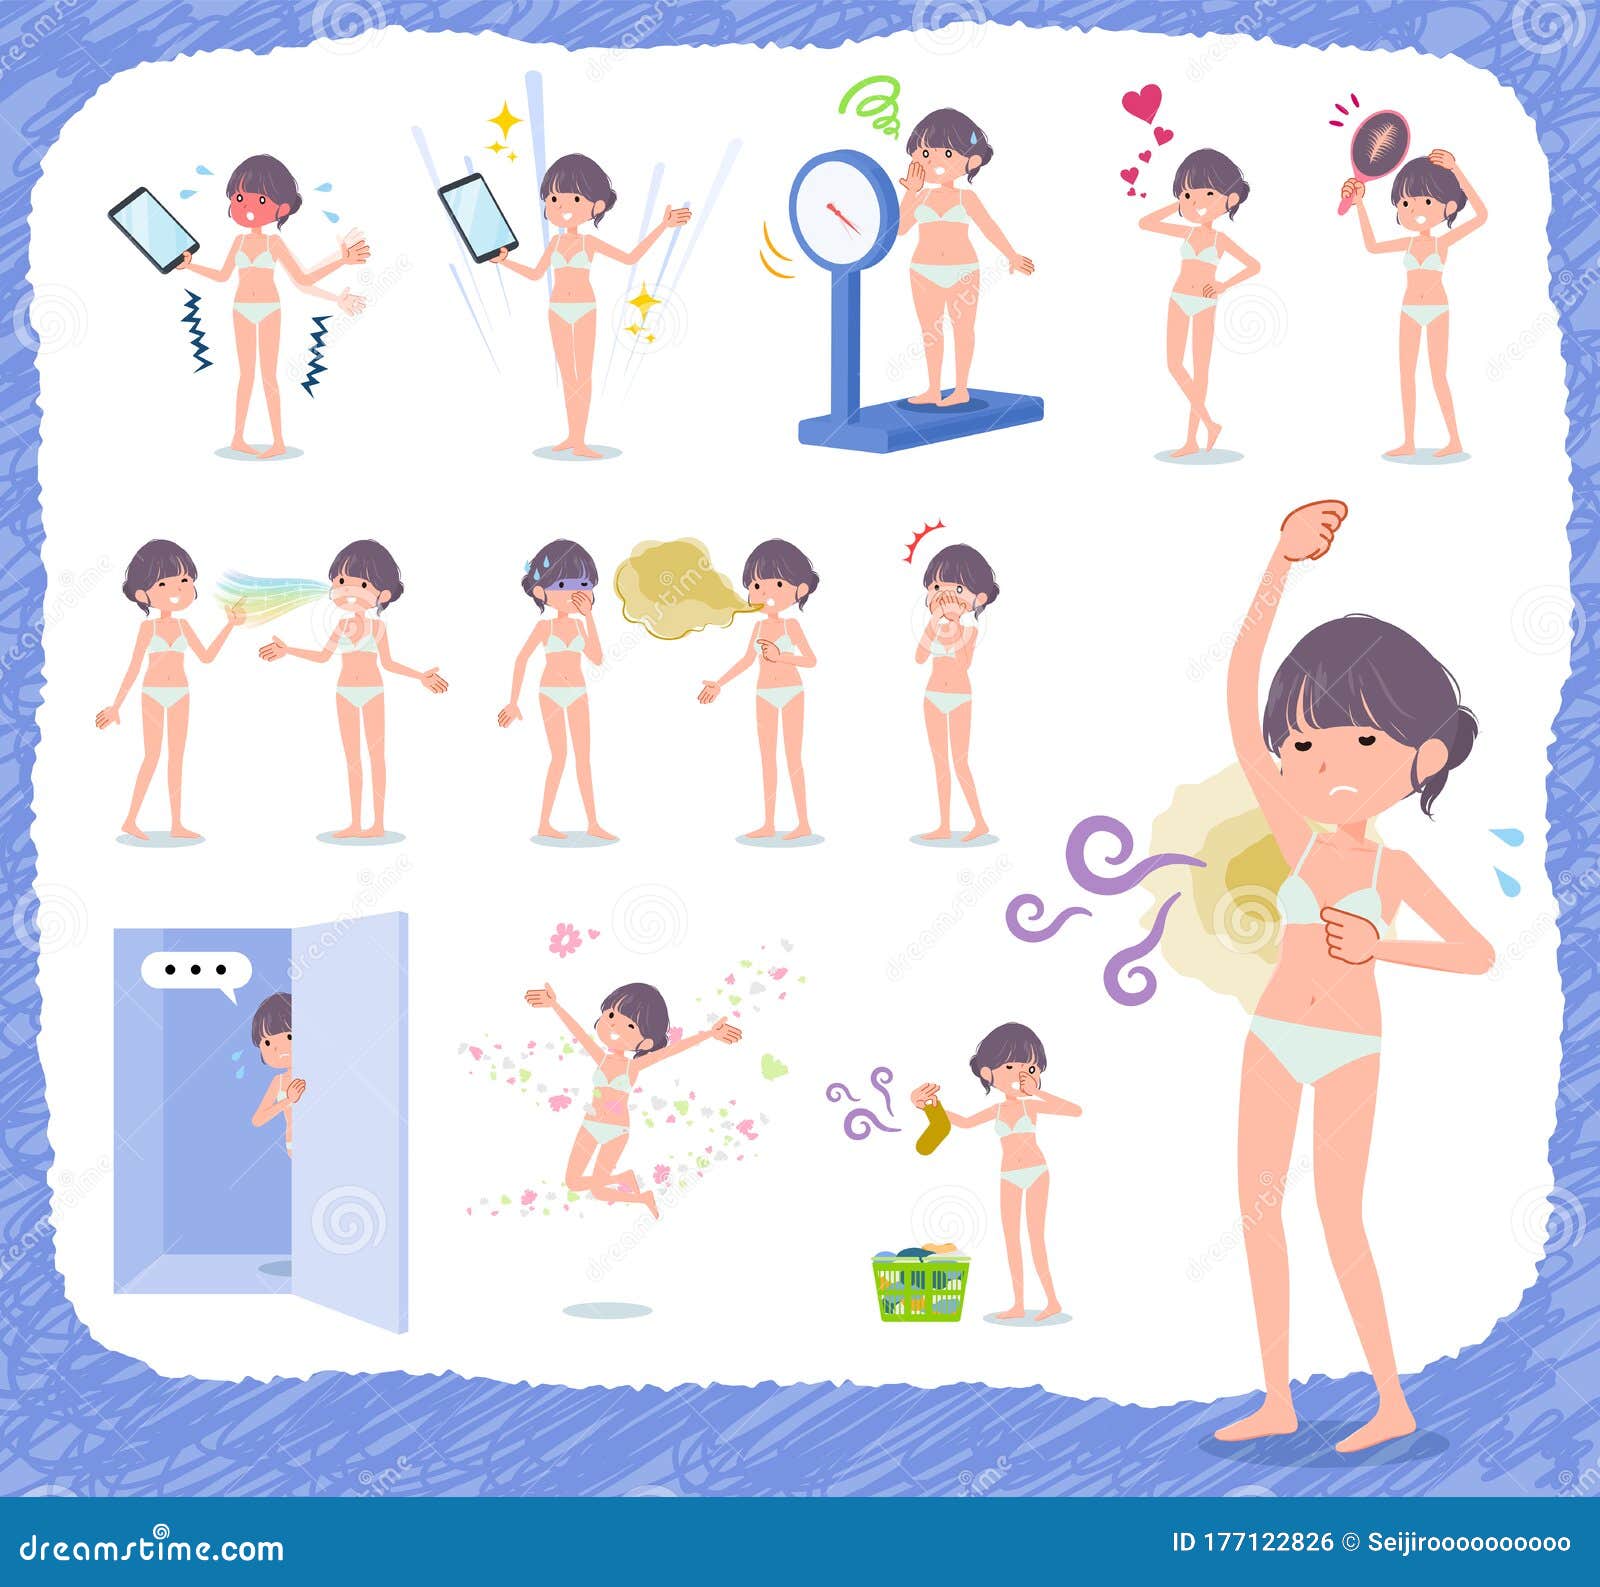 https://thumbs.dreamstime.com/z/flat-type-underwear-women-complex-set-inferiority-there-actions-suffering-smell-appearance-s-vector-art-177122826.jpg